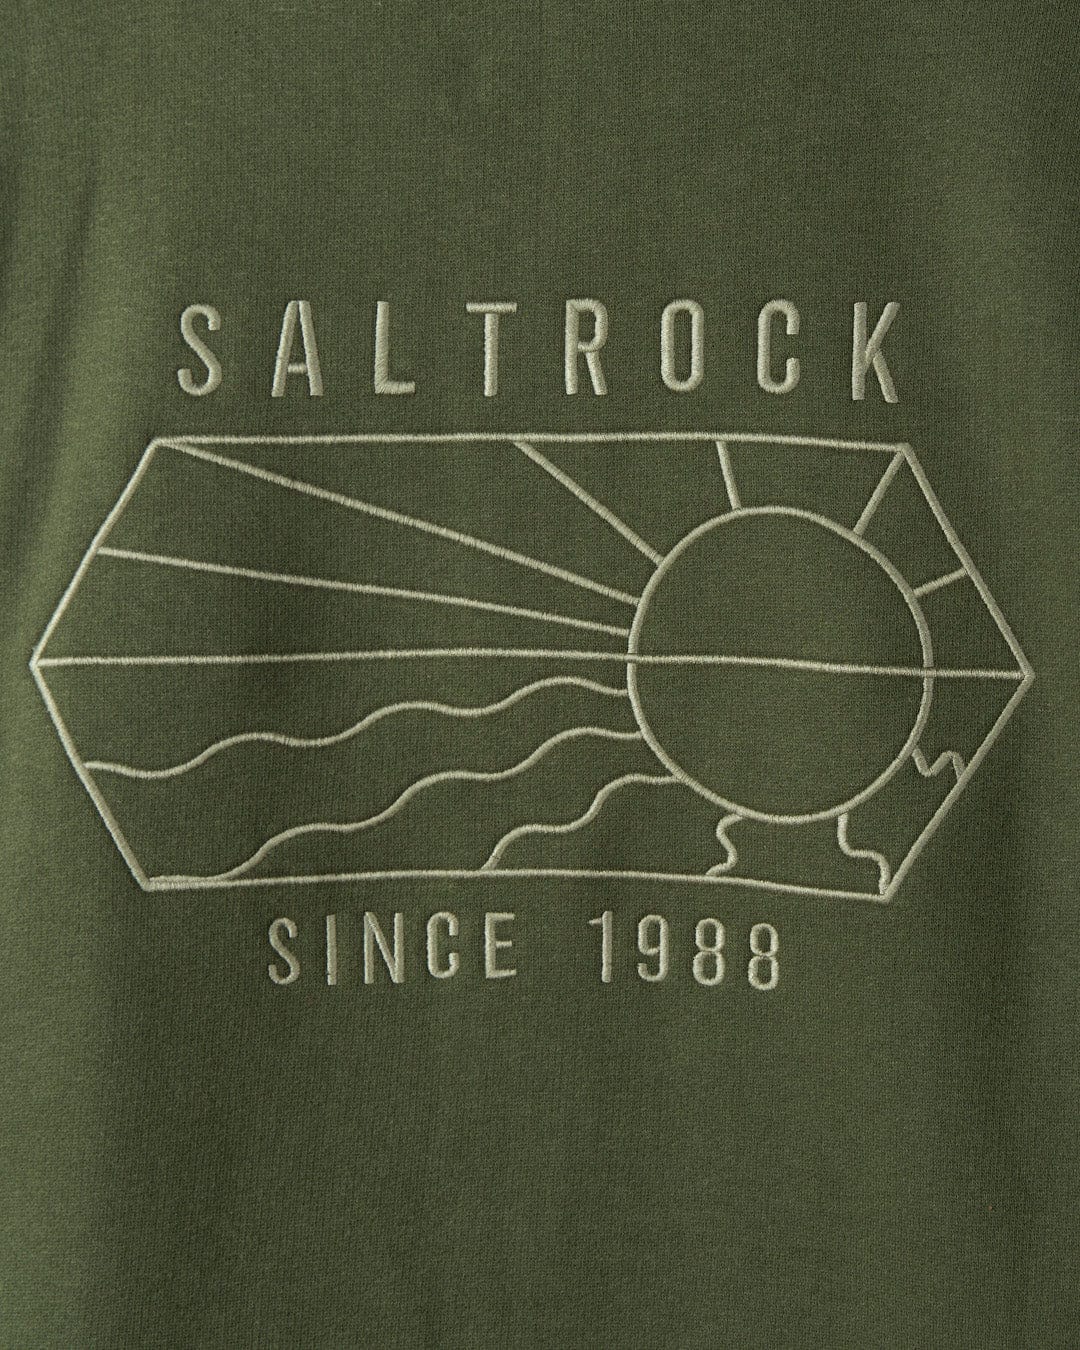 Close-up of a green Saltrock Vantage Outline - Recycled Mens Zip Hoodie - Dark Green with the embroidered logo "Saltrock since 1988", featuring a stylized sun and waves inside a geometric shape.